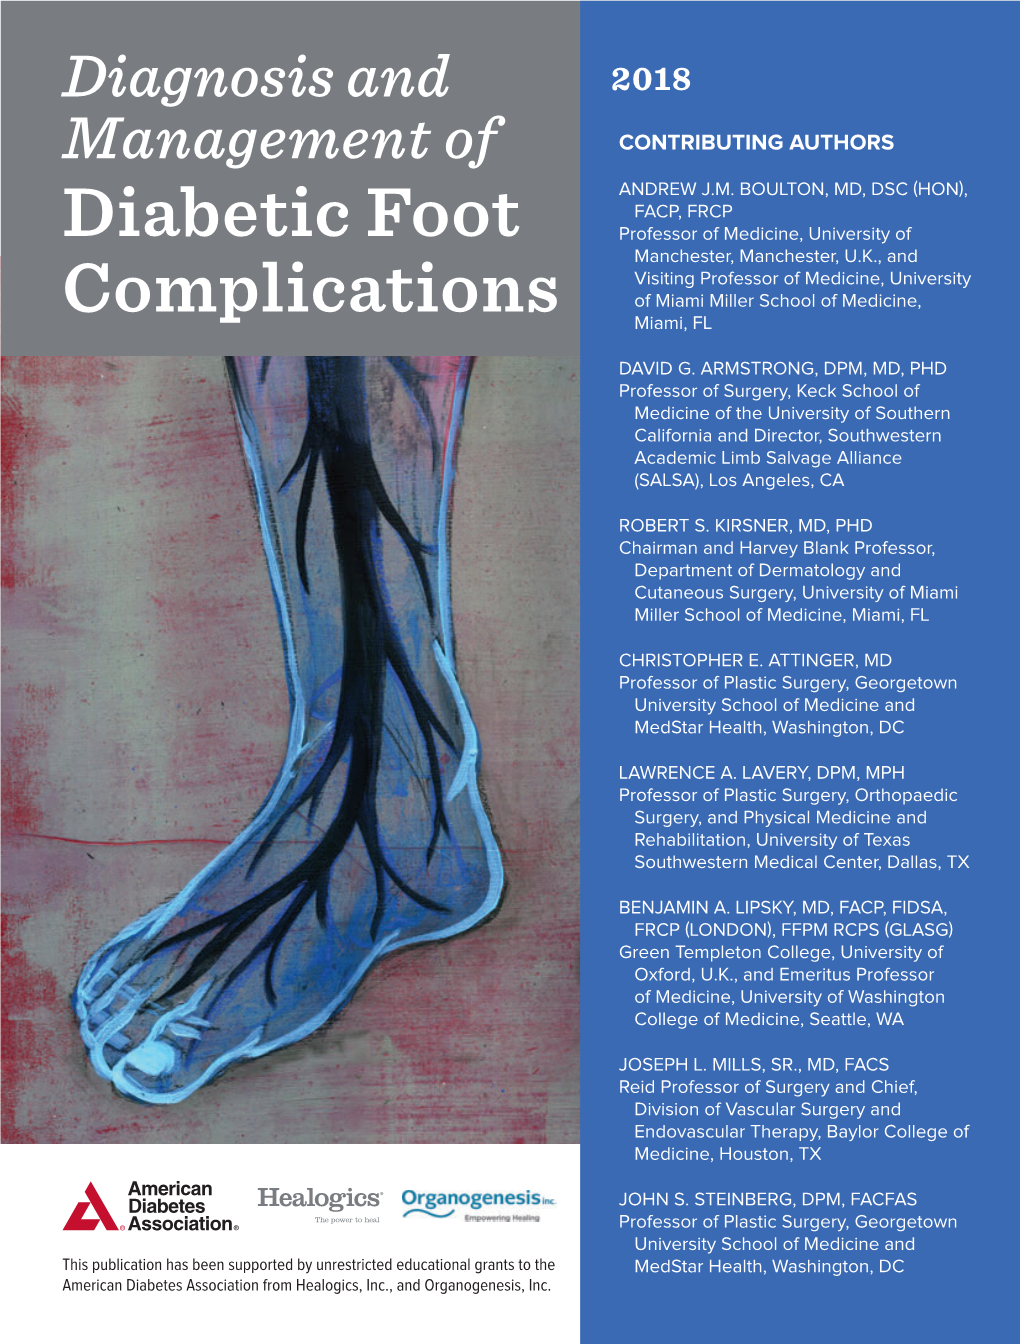 Diagnosis and Management of Diabetic Foot Complications” Is Published by the American Diabetes Association, 2451 Crystal Drive, Arlington, VA 22202